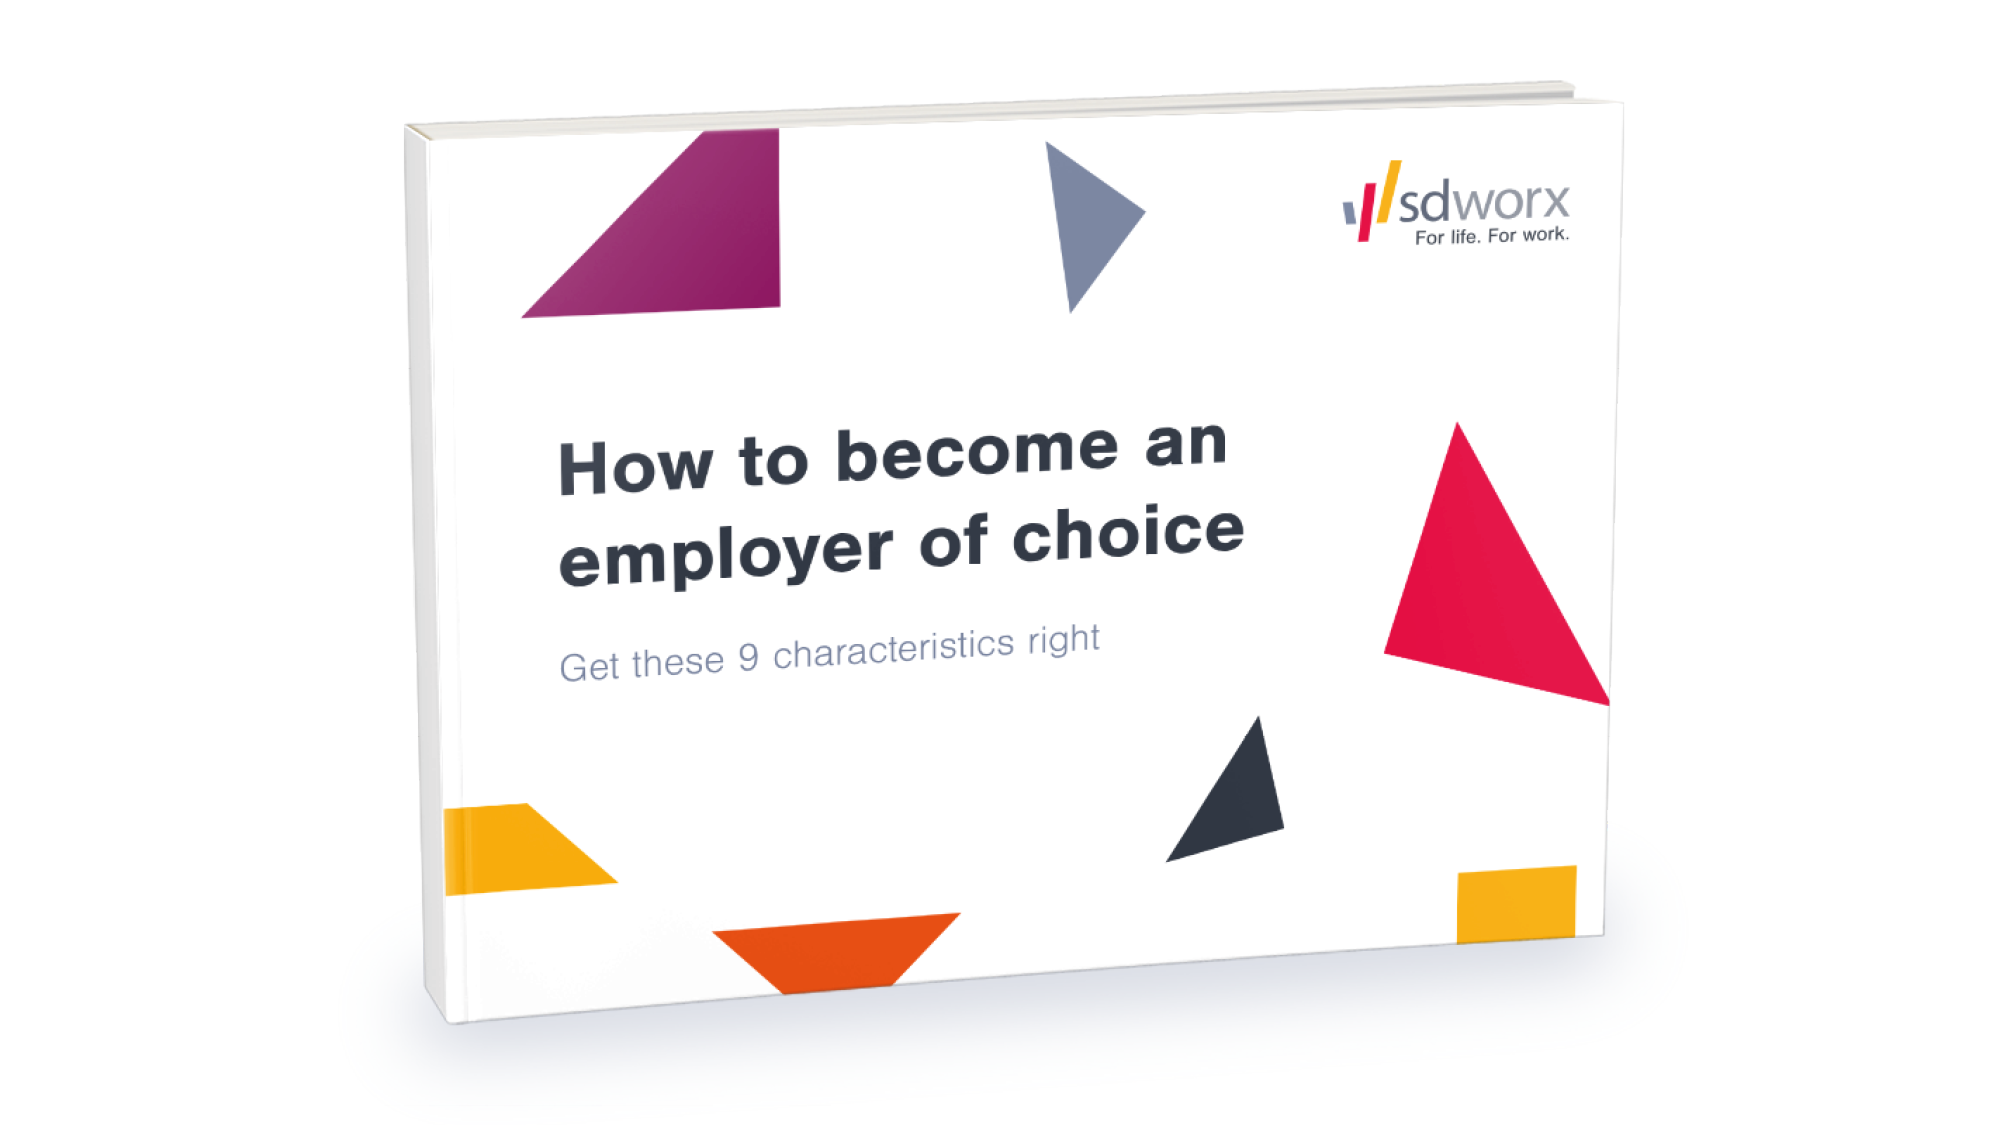 How to become an employer of choice